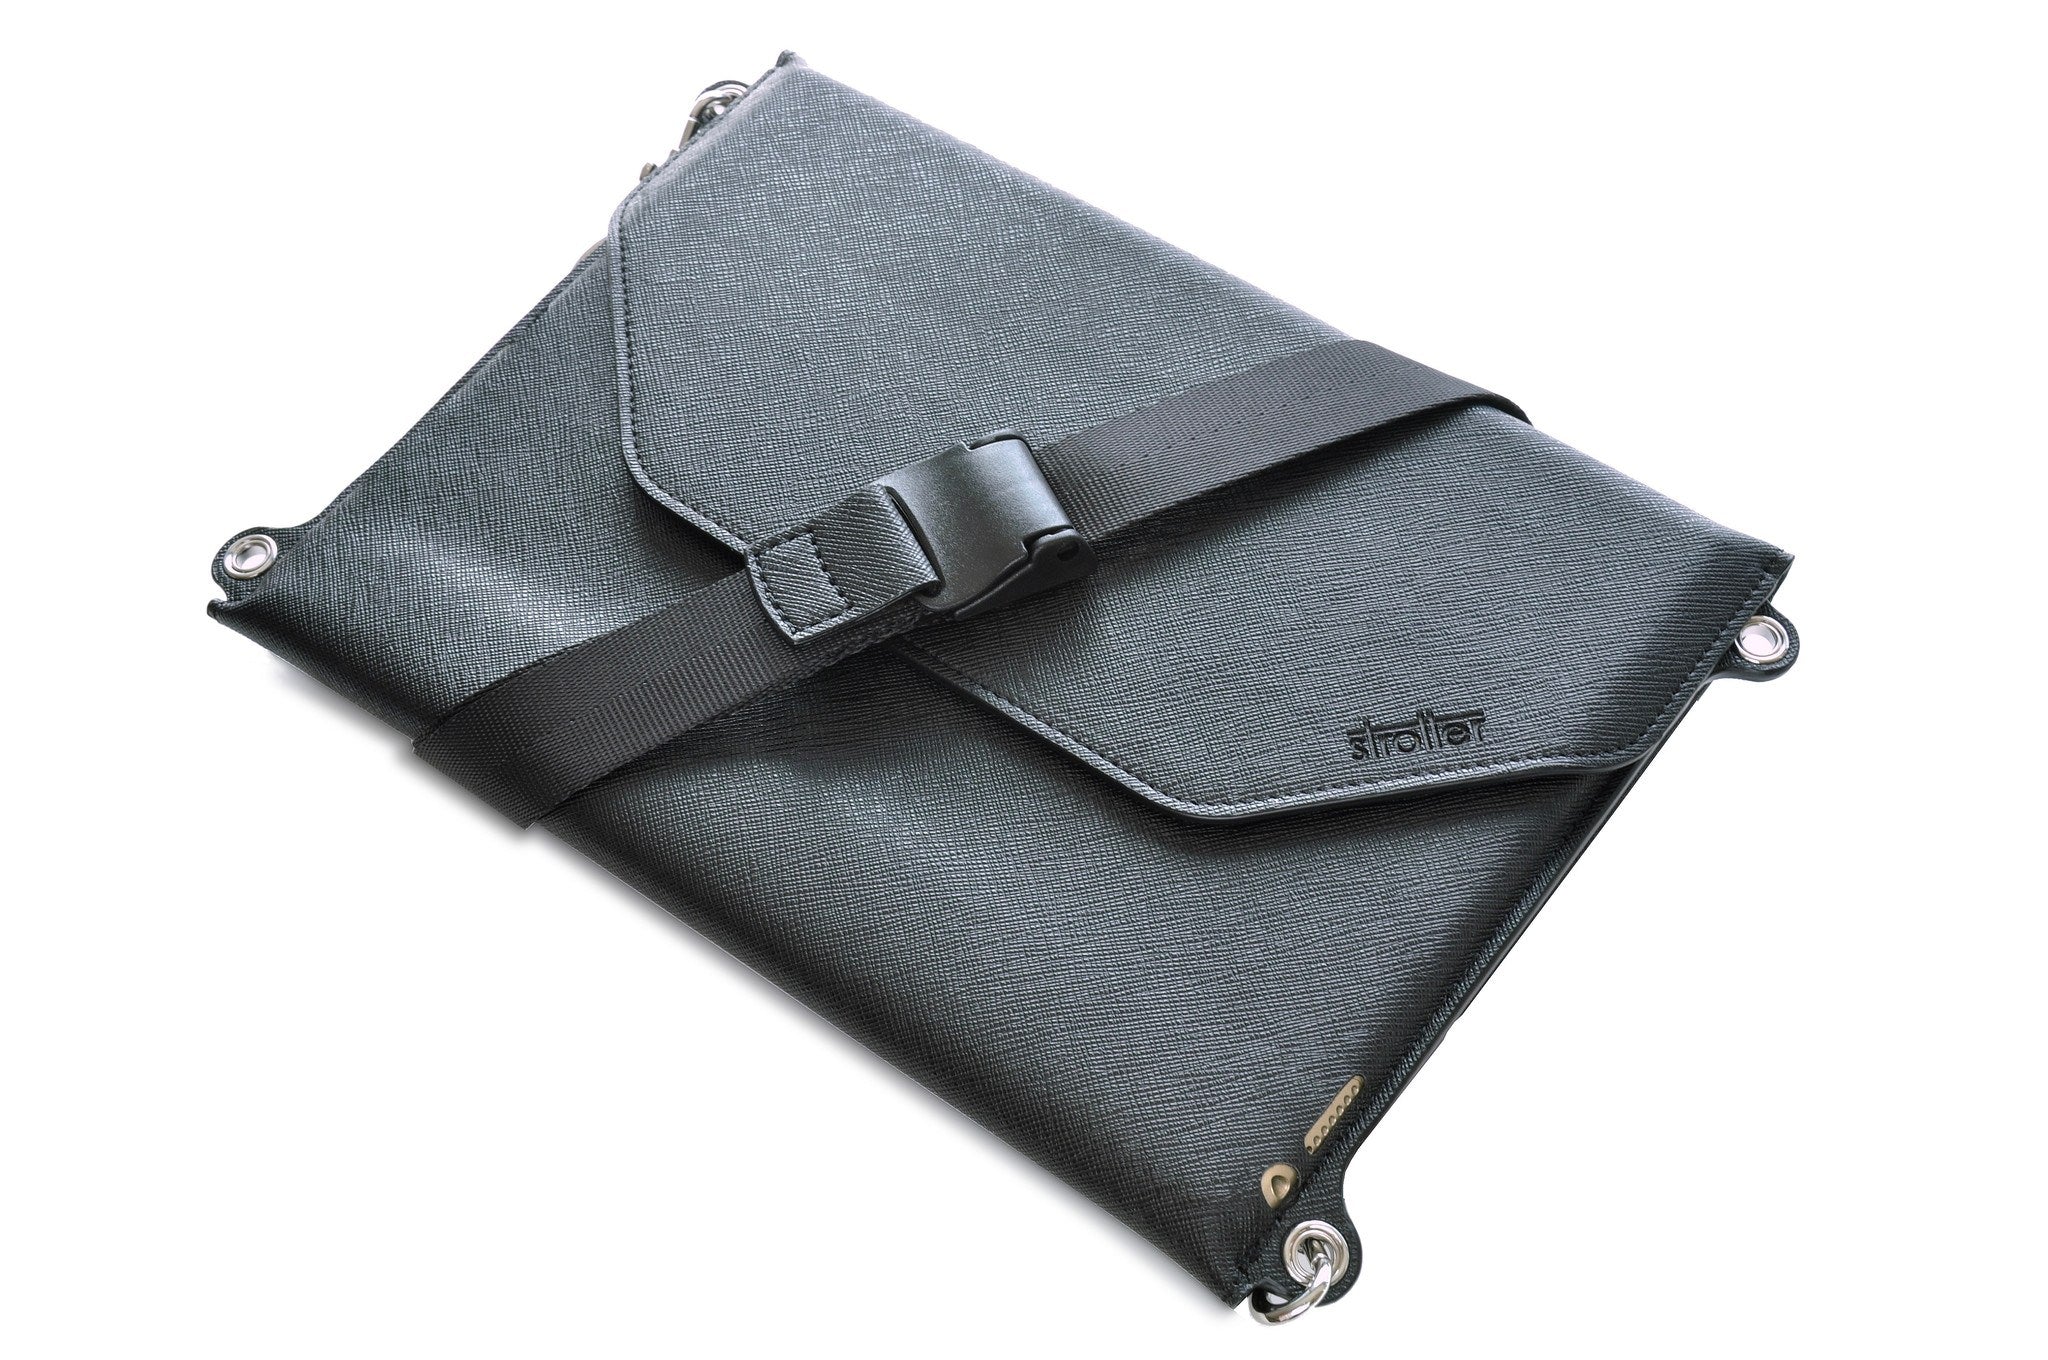 Synthetic leather carrying case with shoulder strap for iPad Pro 9.7"